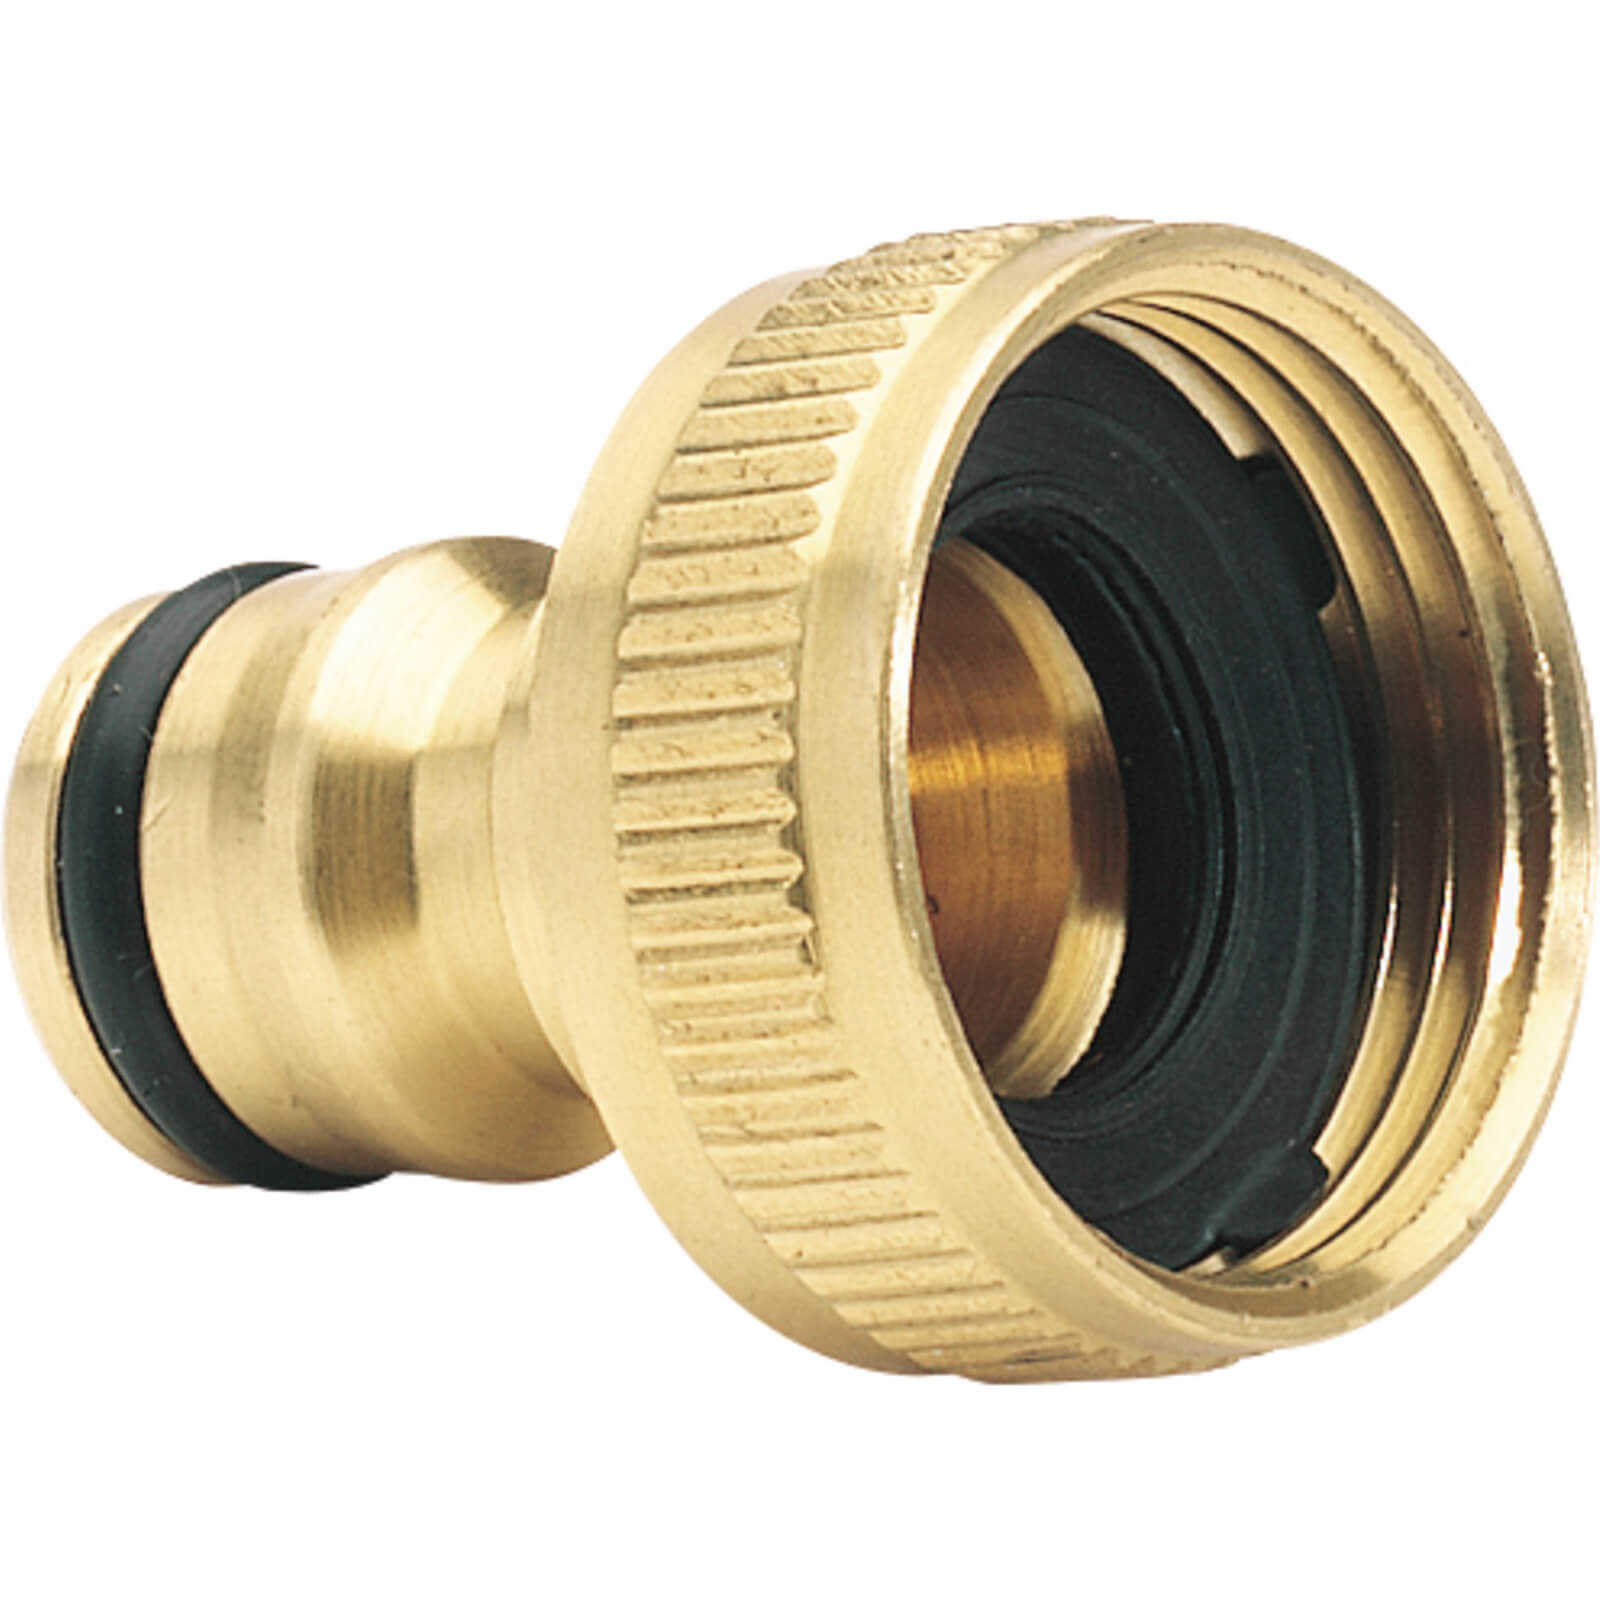 Image of Draper Expert Brass Hose Pipe Tap Connector 3/4" / 19mm Pack of 1